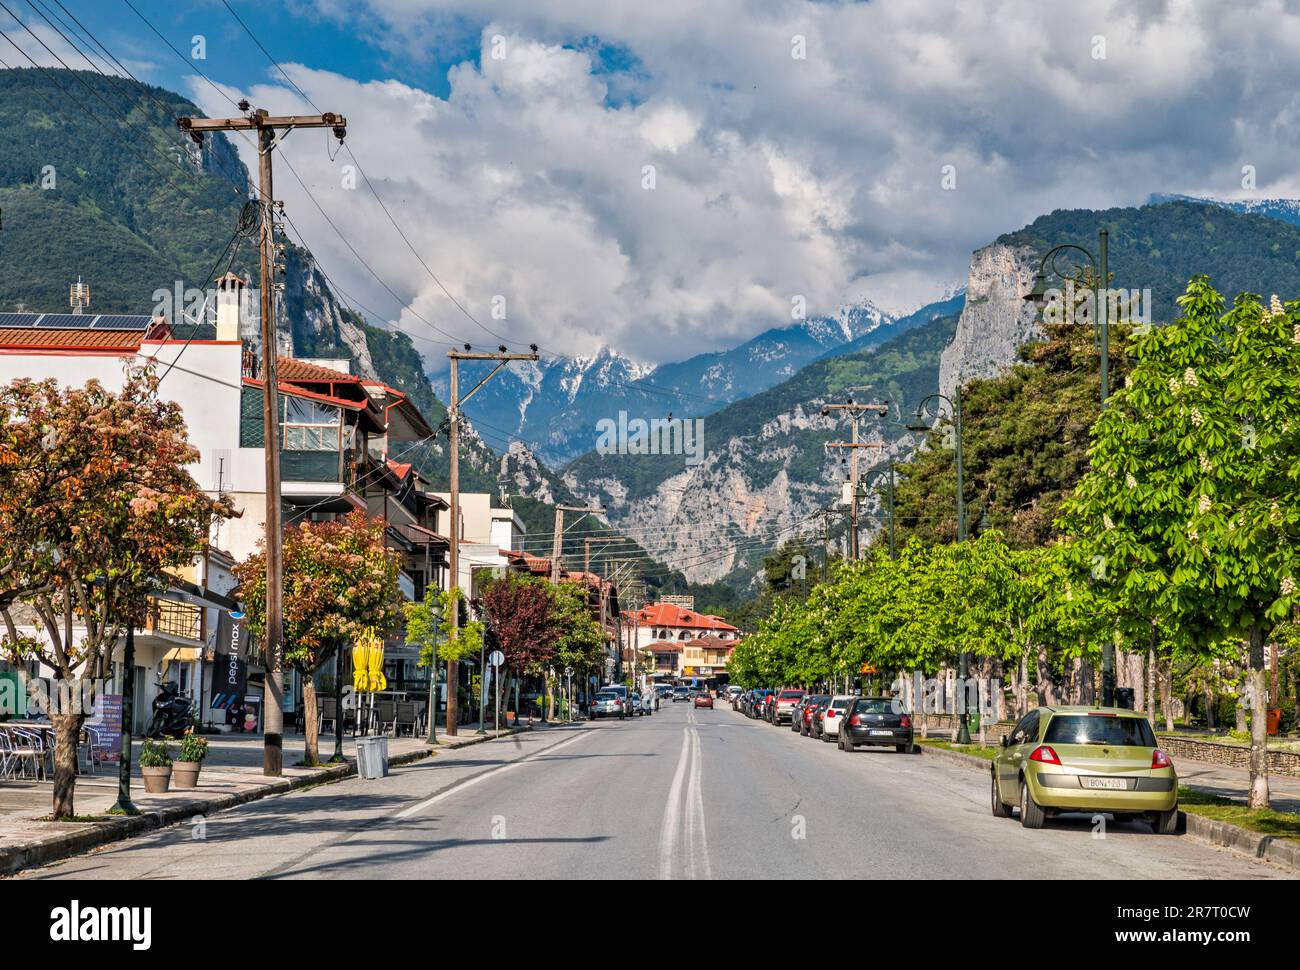 Peaks of Mount Olympus over town of Litochoro, Mount Olympus National Park, Central Macedonia region, Greece Stock Photo